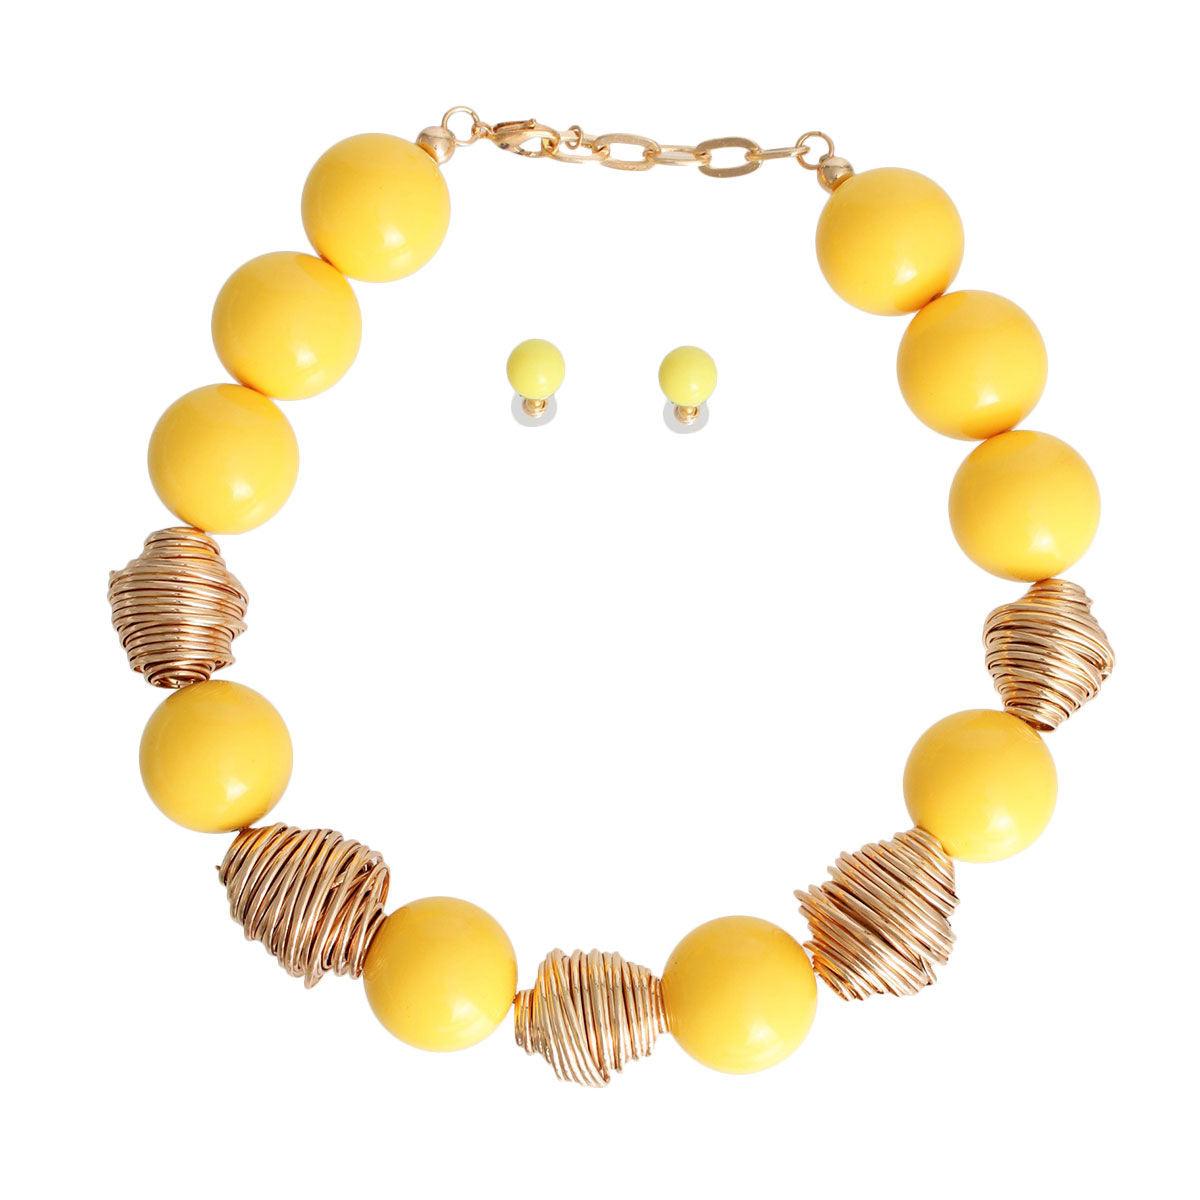 Stunning Chunky Yellow Bead Jewelry Set: Necklace & Earrings